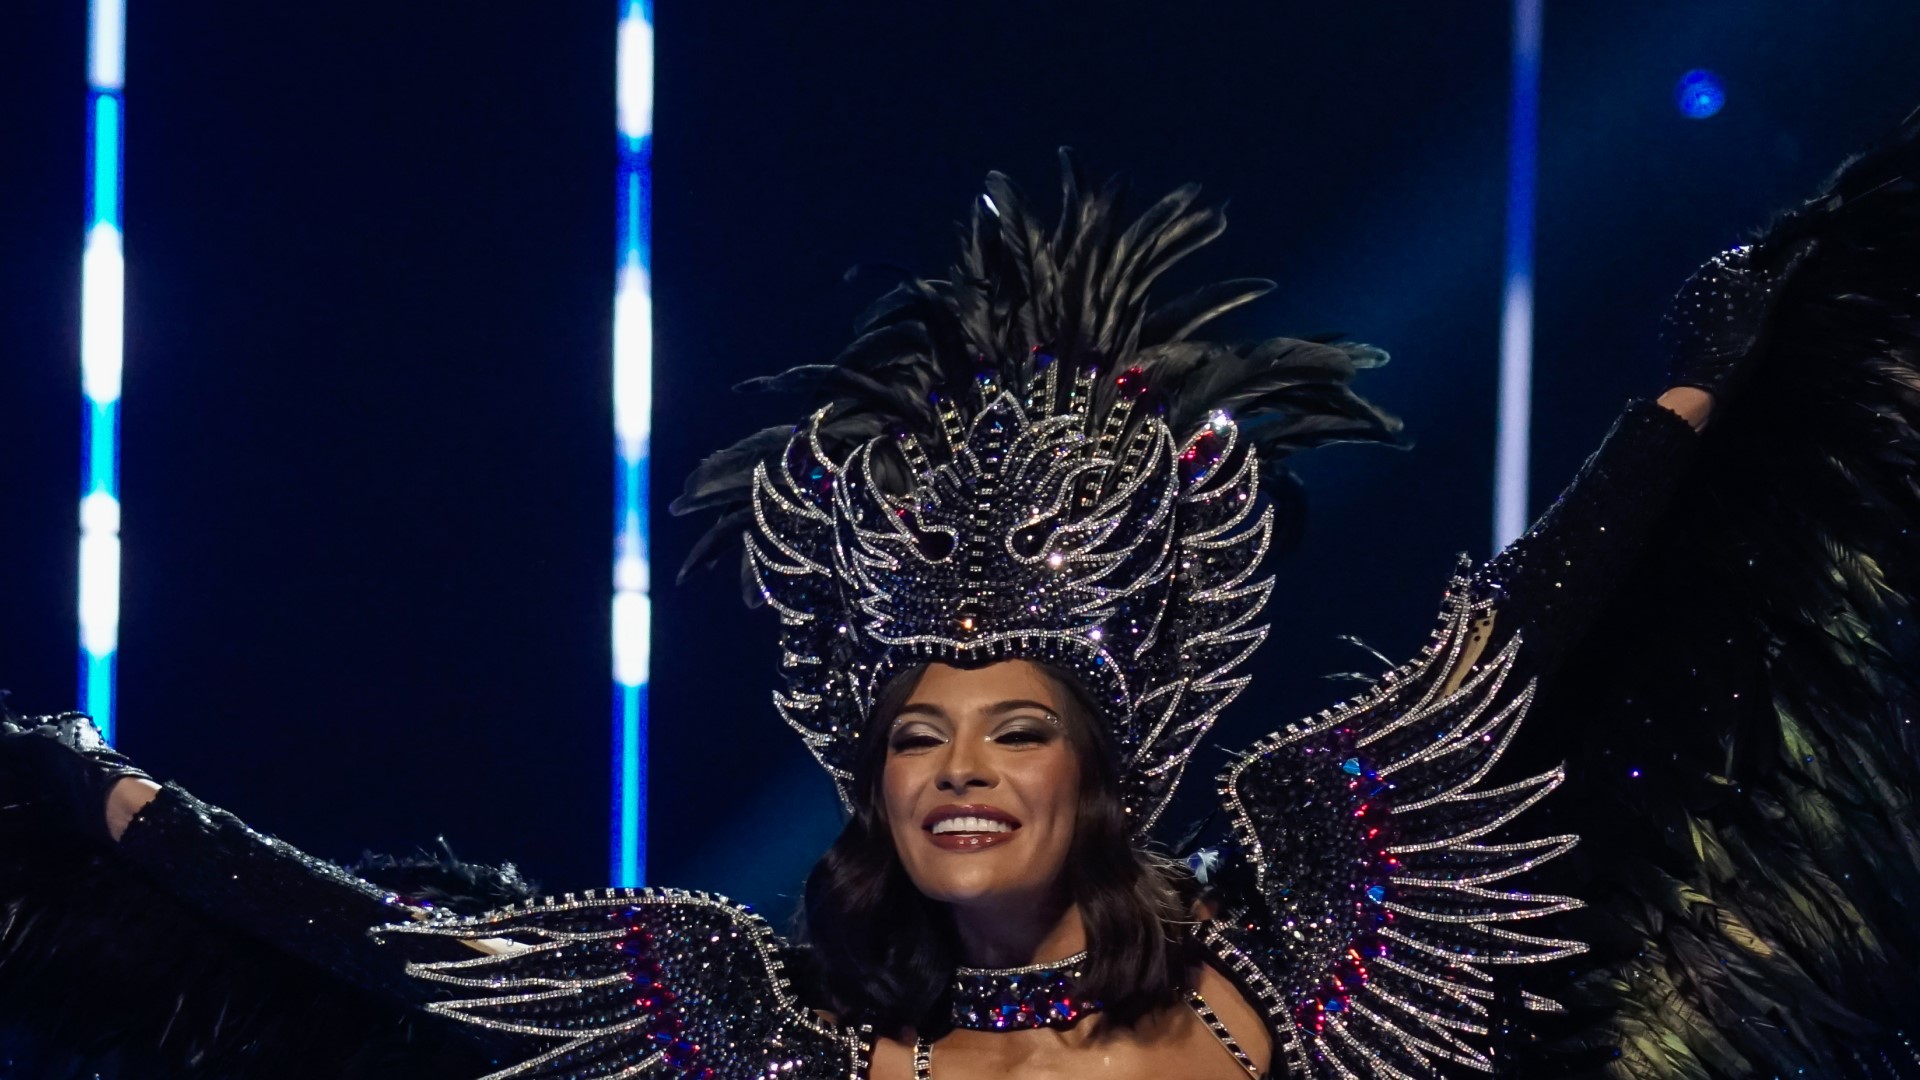 The reigning Miss Universe: Nicaragua's Sheynnis Palacios